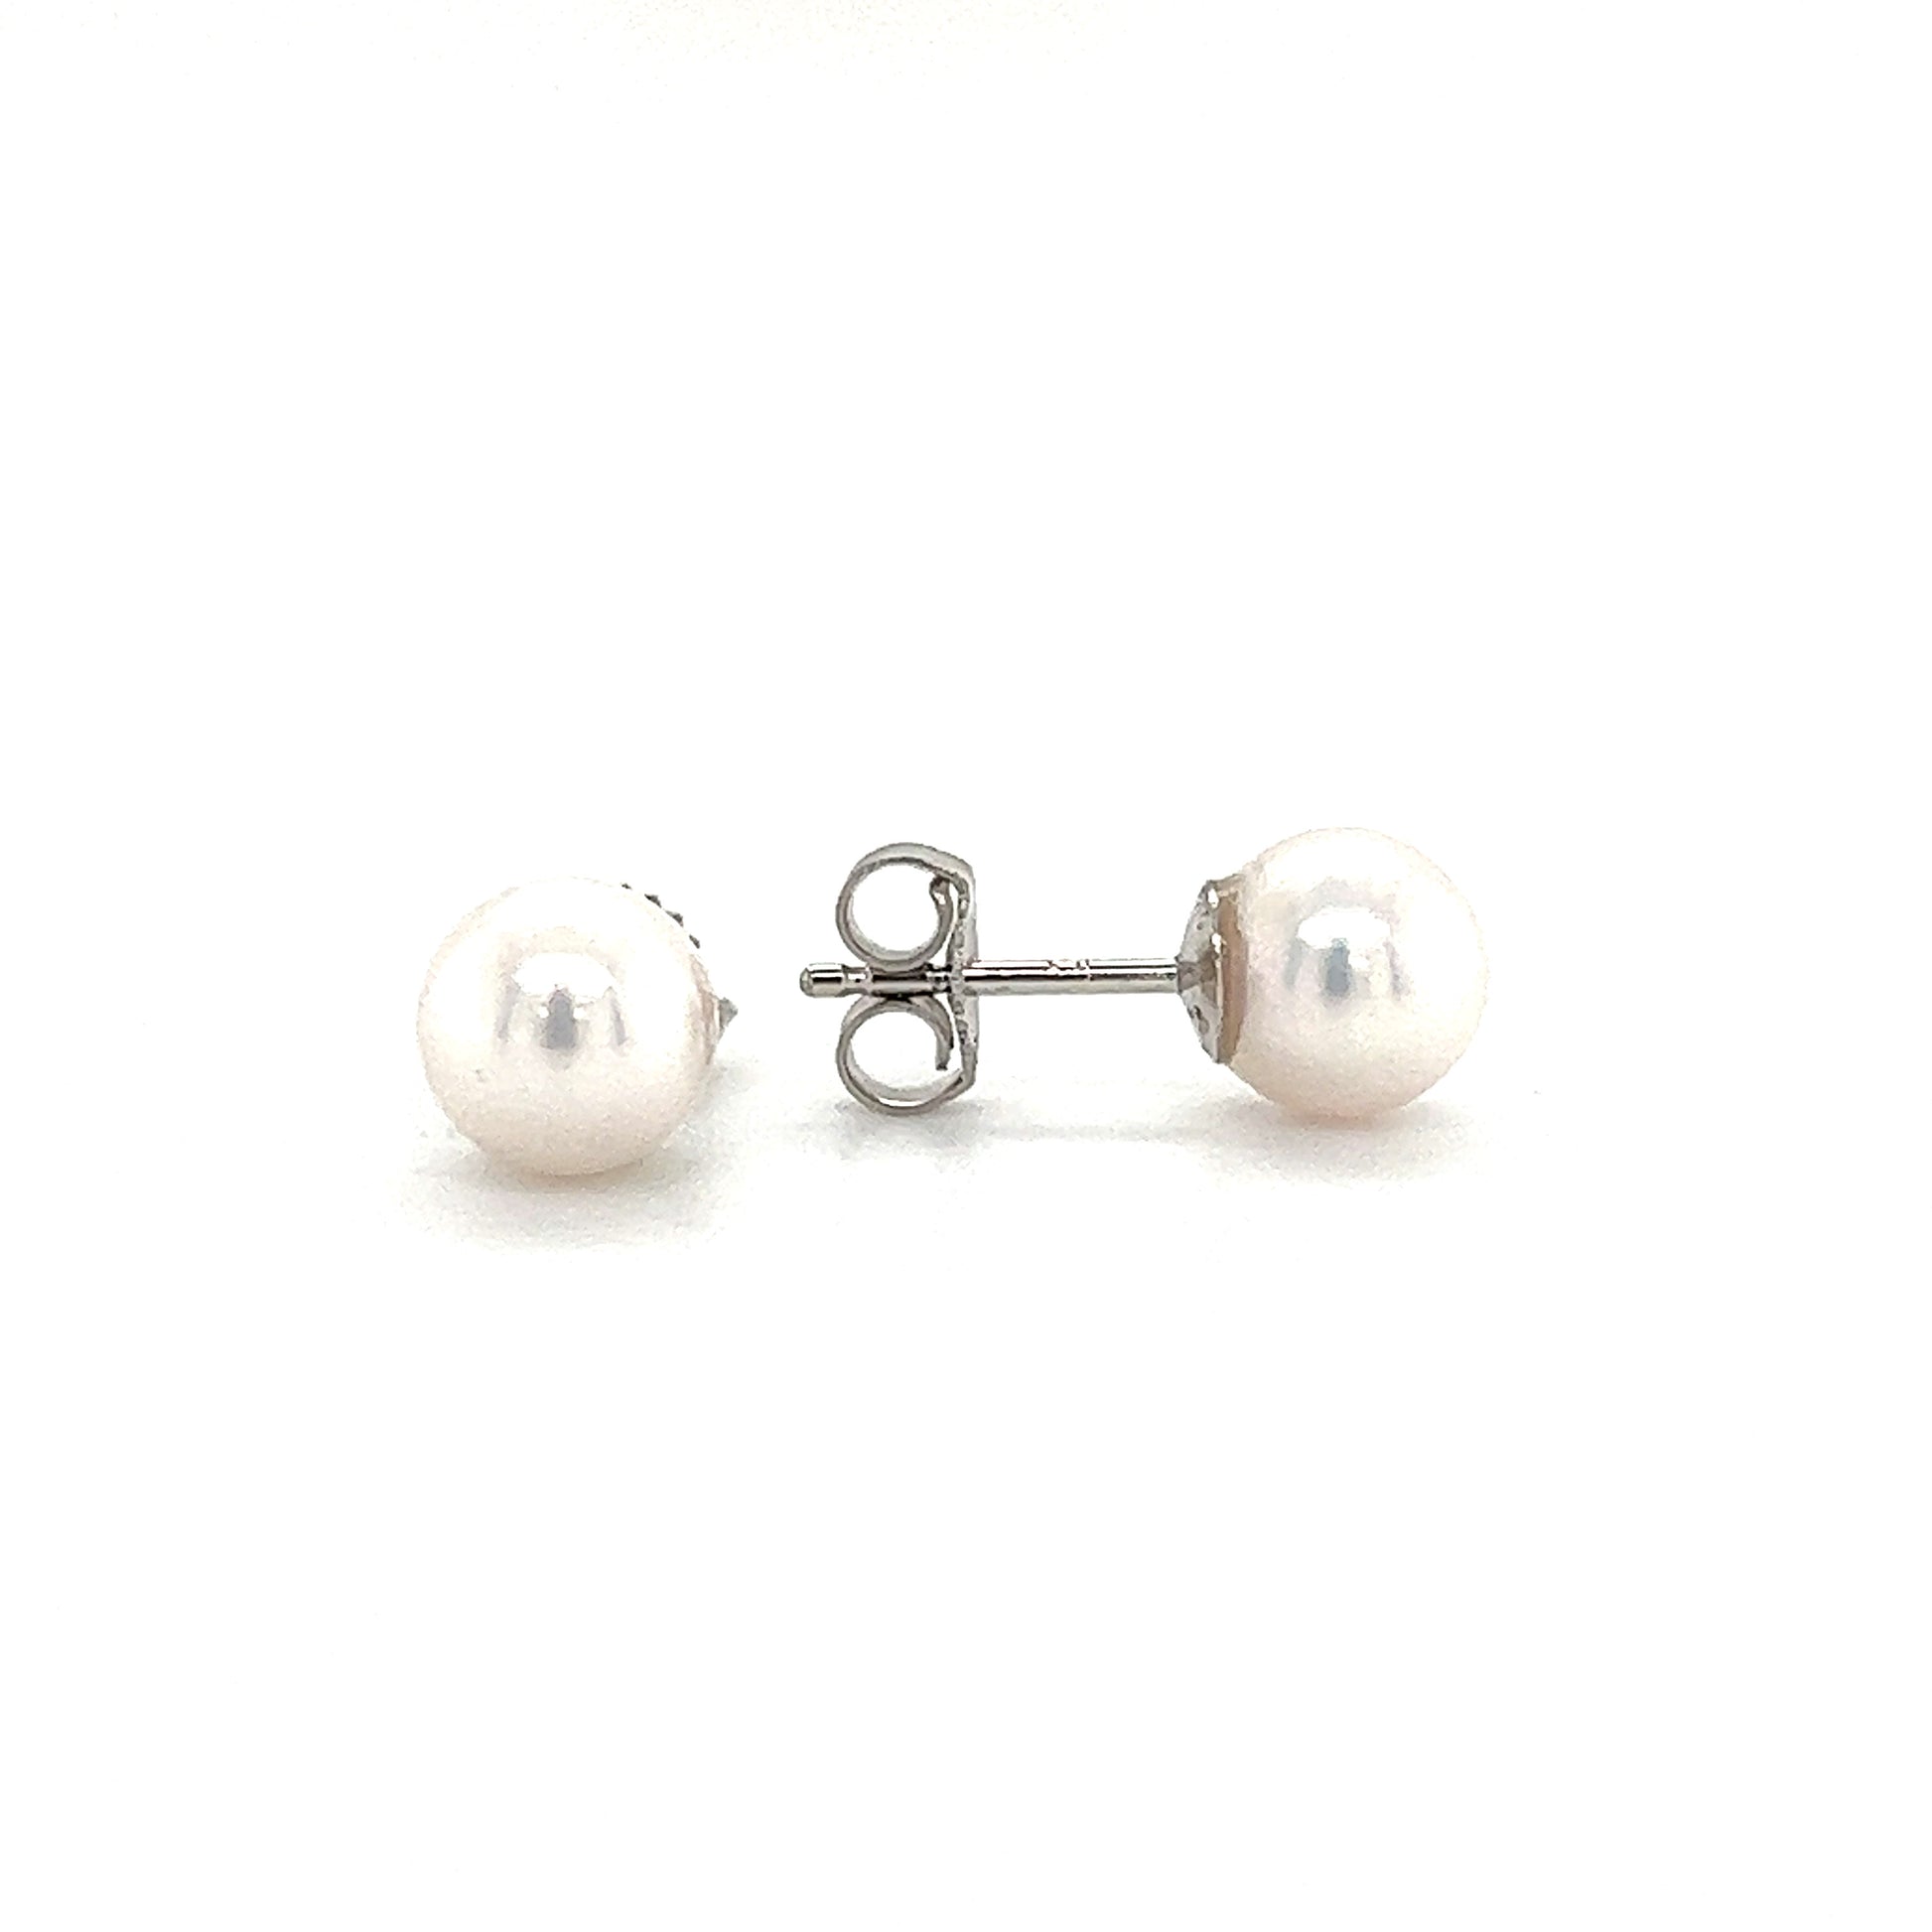 Pearl 6mm Stud Earrings in 14K White Gold Front and Side View